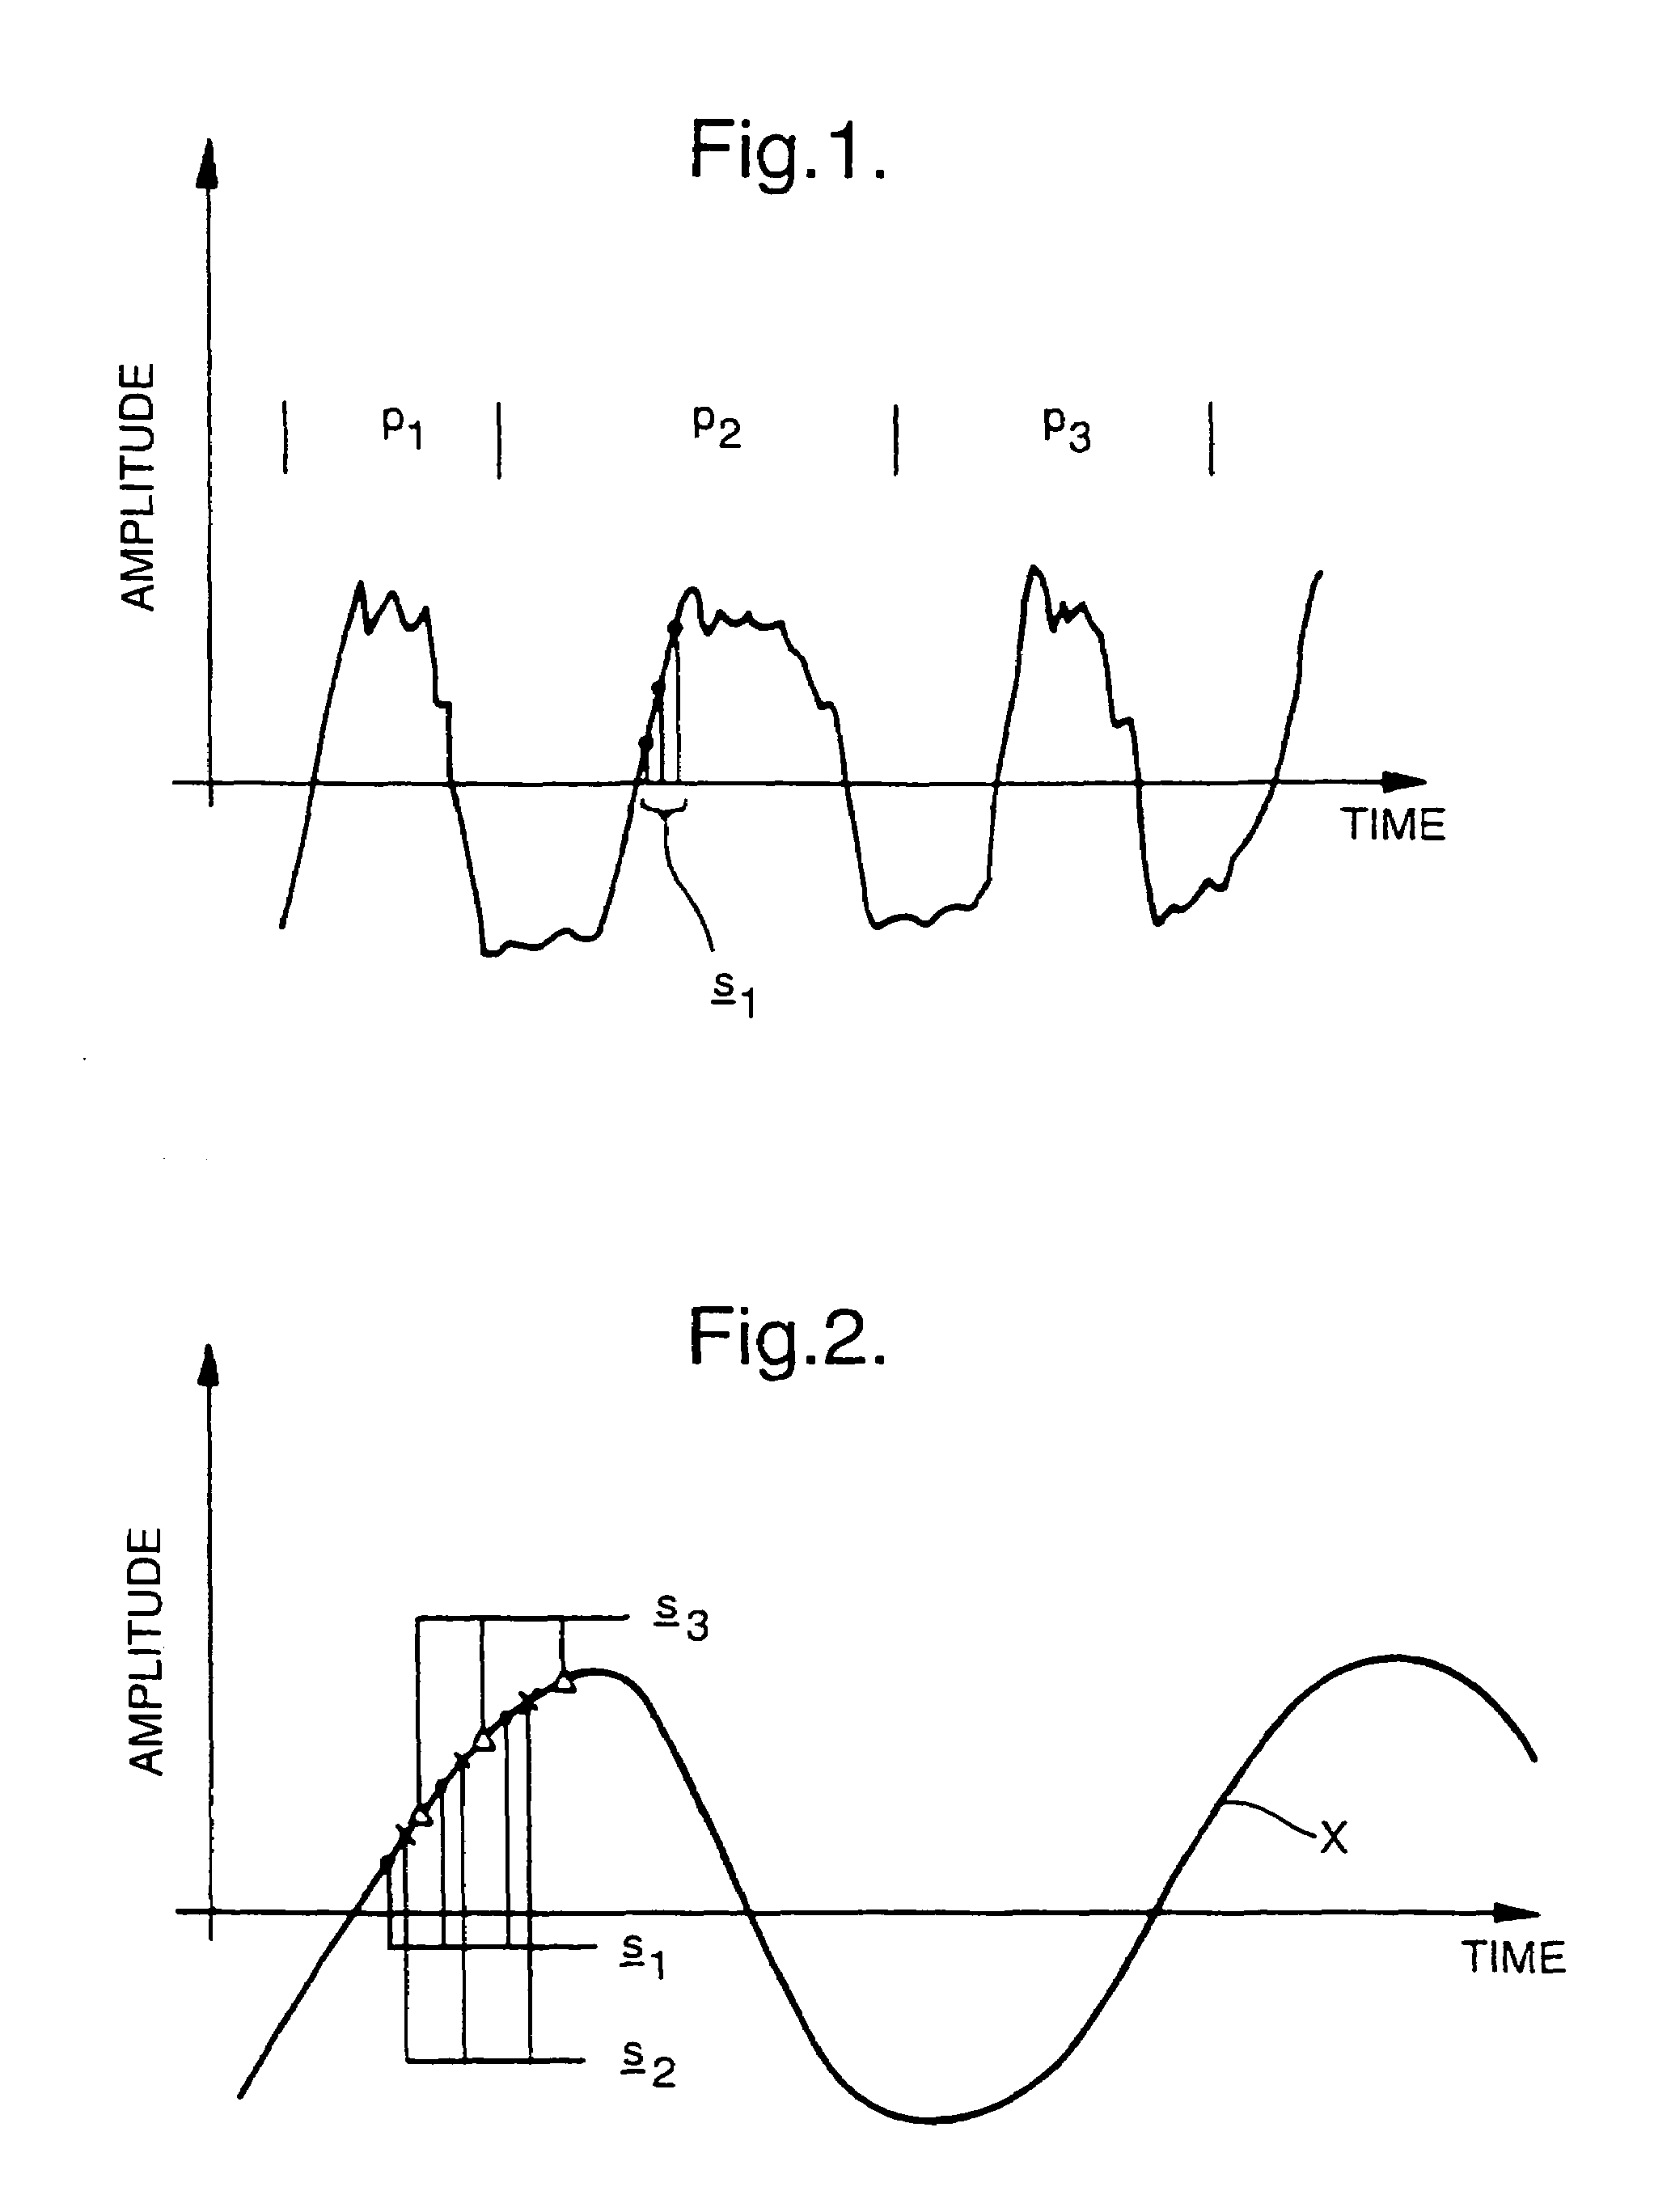 Waveform synthesis